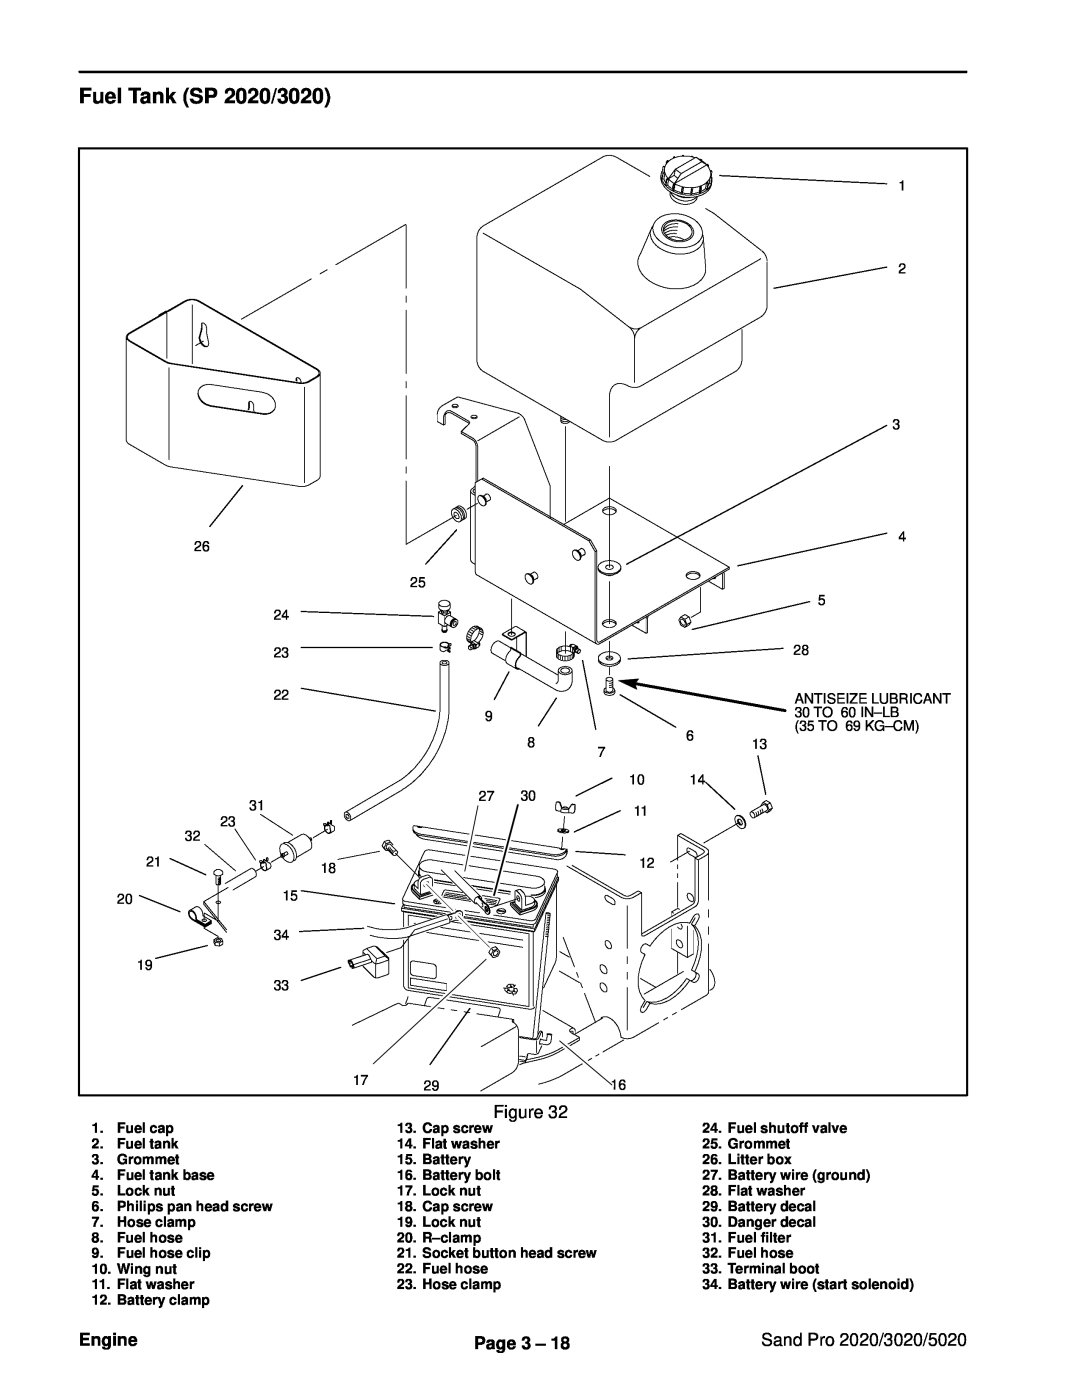 Toro service manual Fuel Tank SP 2020/3020, Engine, Page 3, Sand Pro 2020/3020/5020, Antiseize Lubricant, 30 TO 60 IN-LB 